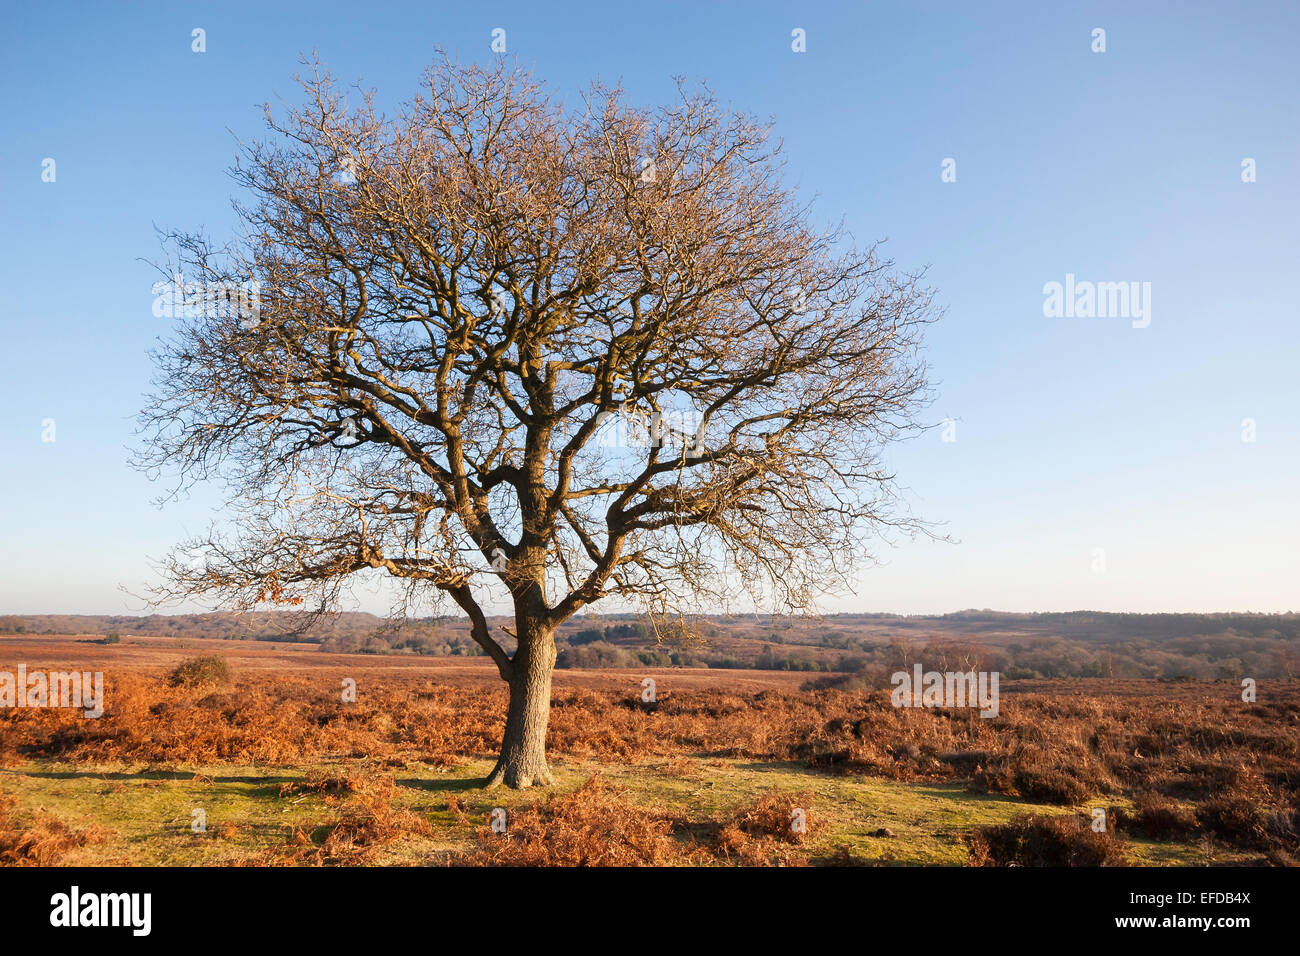 A single, large, mature oak tree stands in the heathland landscape of the New Forest, National Park, UK in winter. Stock Photo